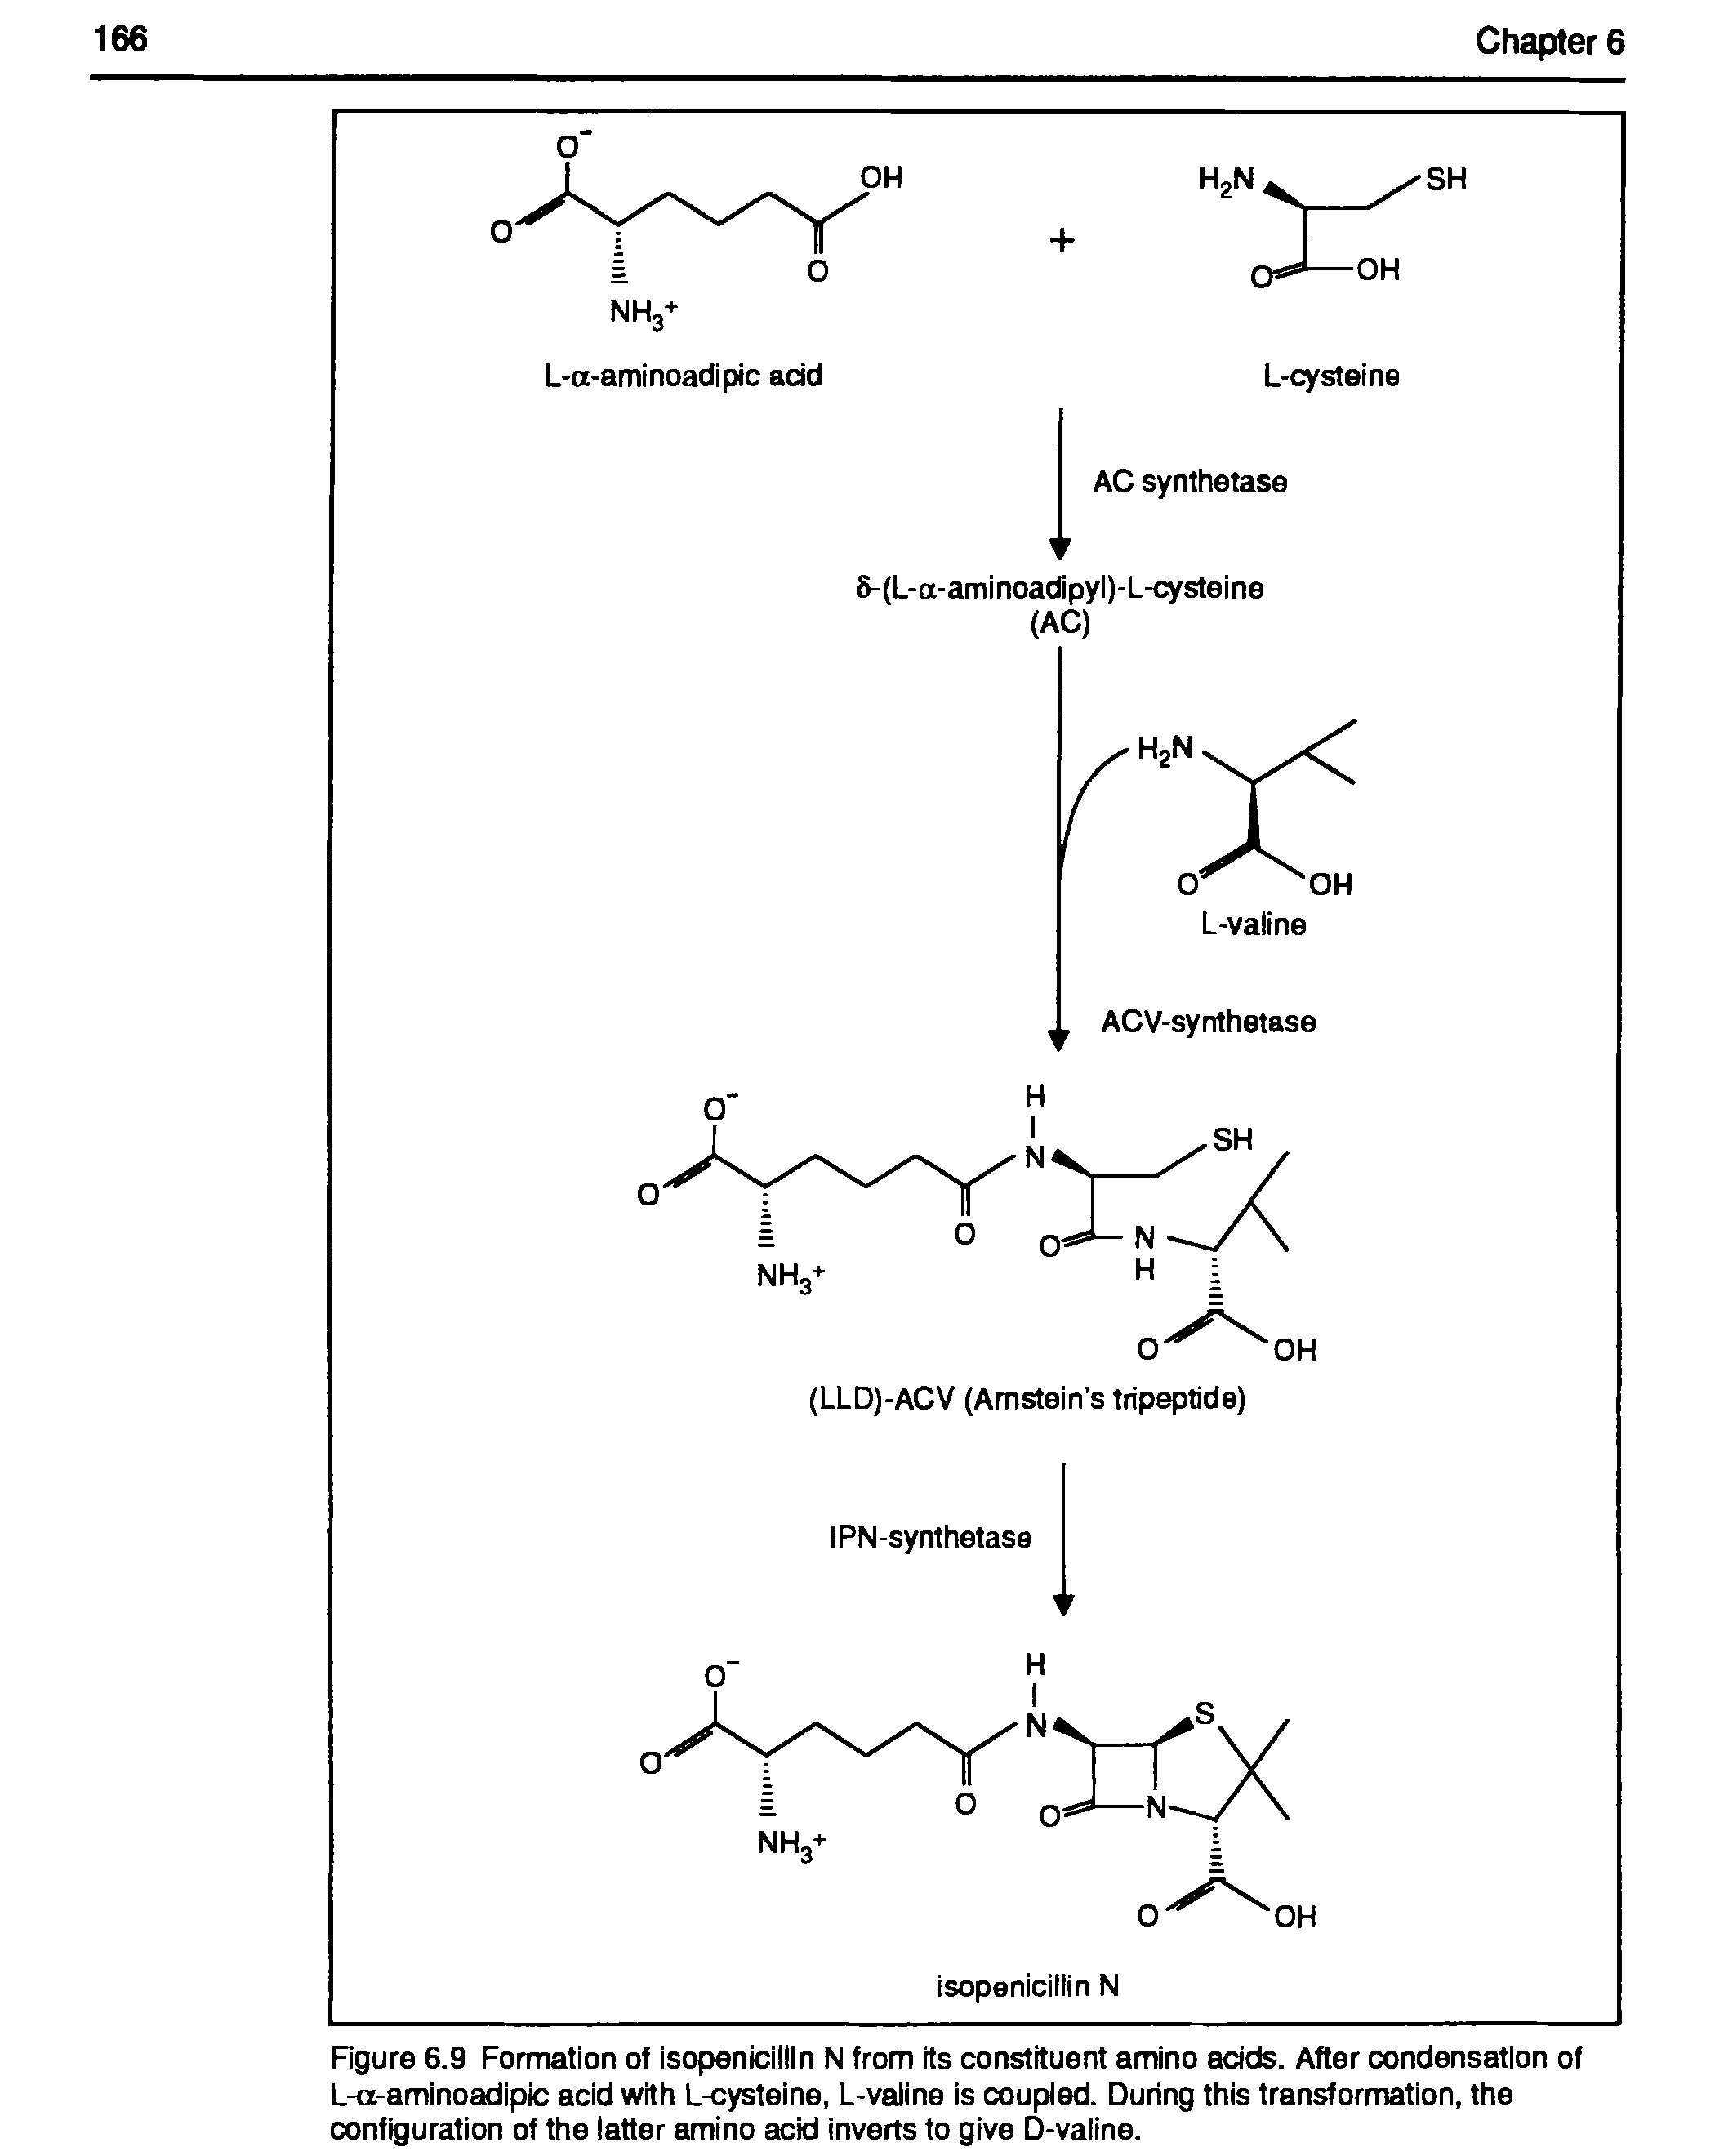 Figure 6.9 Formation of isopenicillin N from its constituent amino acids. After condensation of L-a-aminoadipic acid with L-cysteine, L-valine is coupled. During this transformation, the configuration of the latter amino acid inverts to give D-valine.